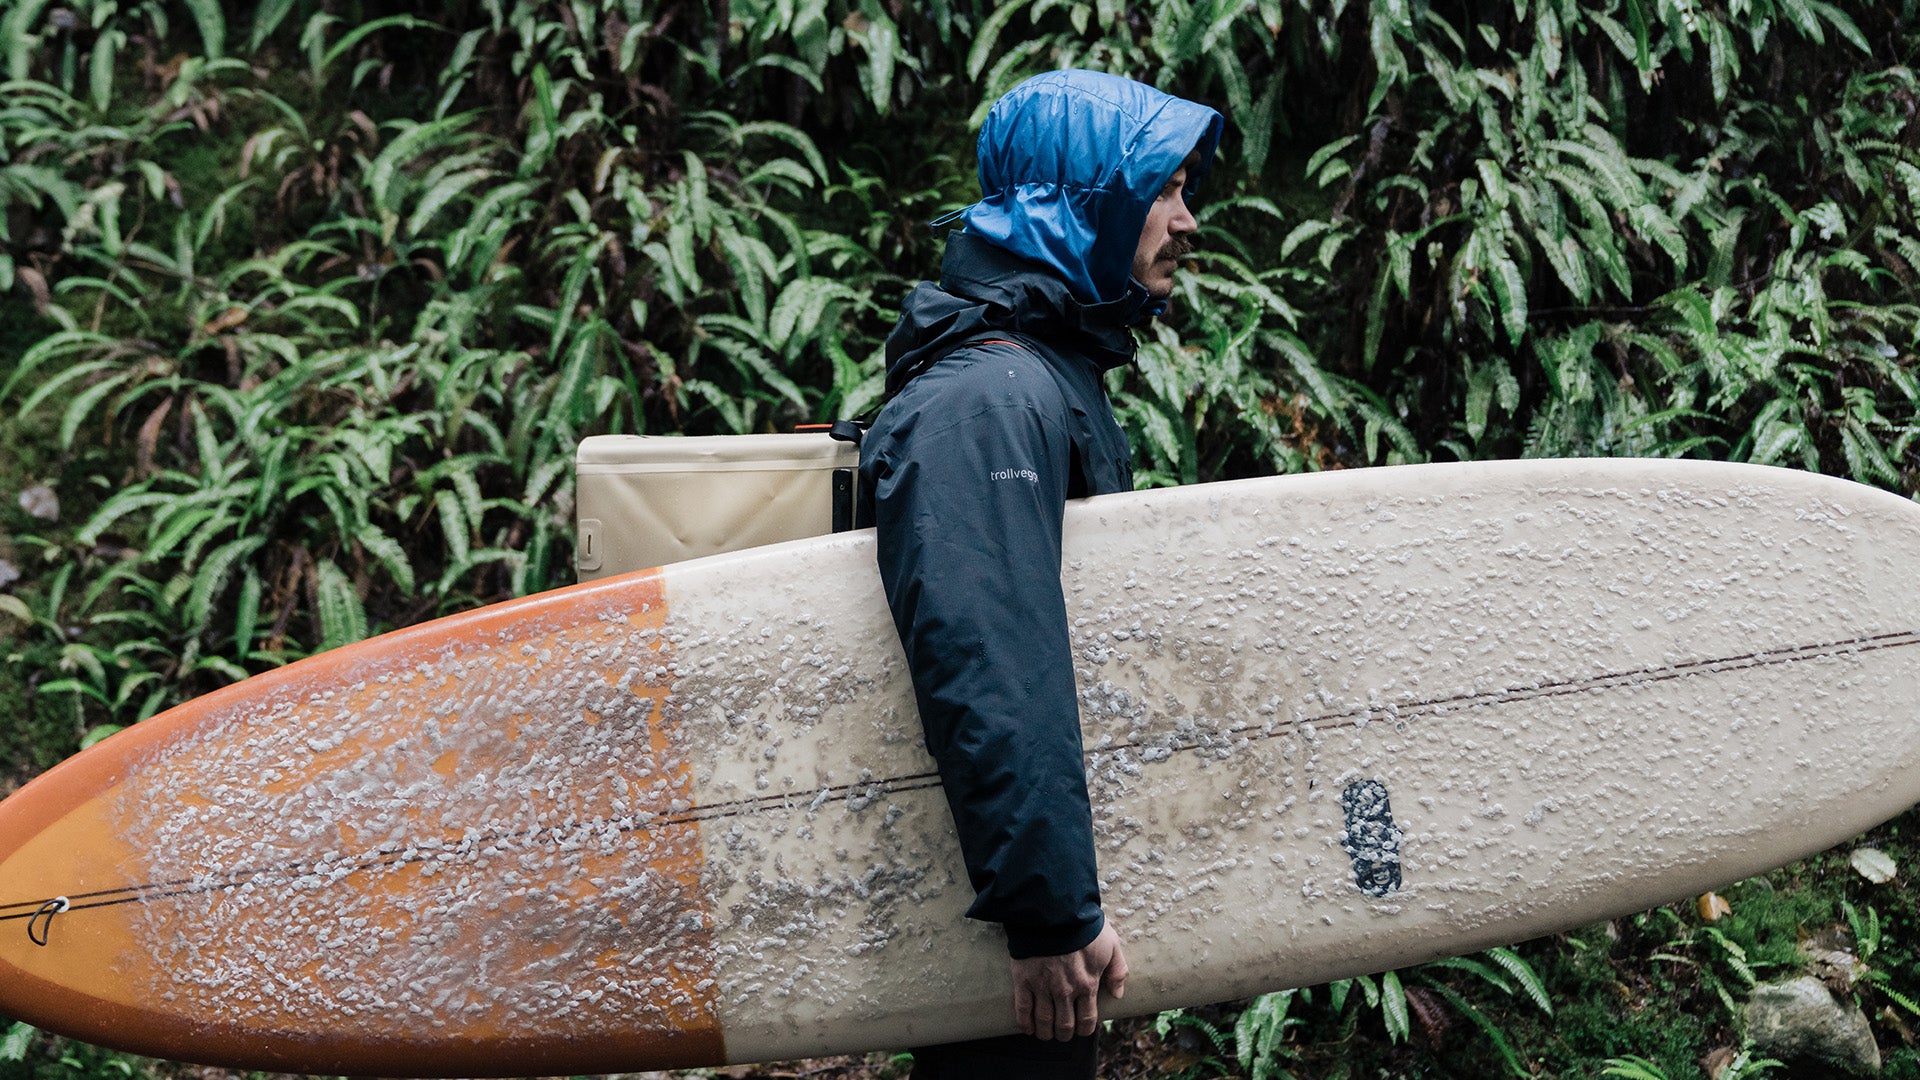 How To Pack for a Cold Water Surf Trip